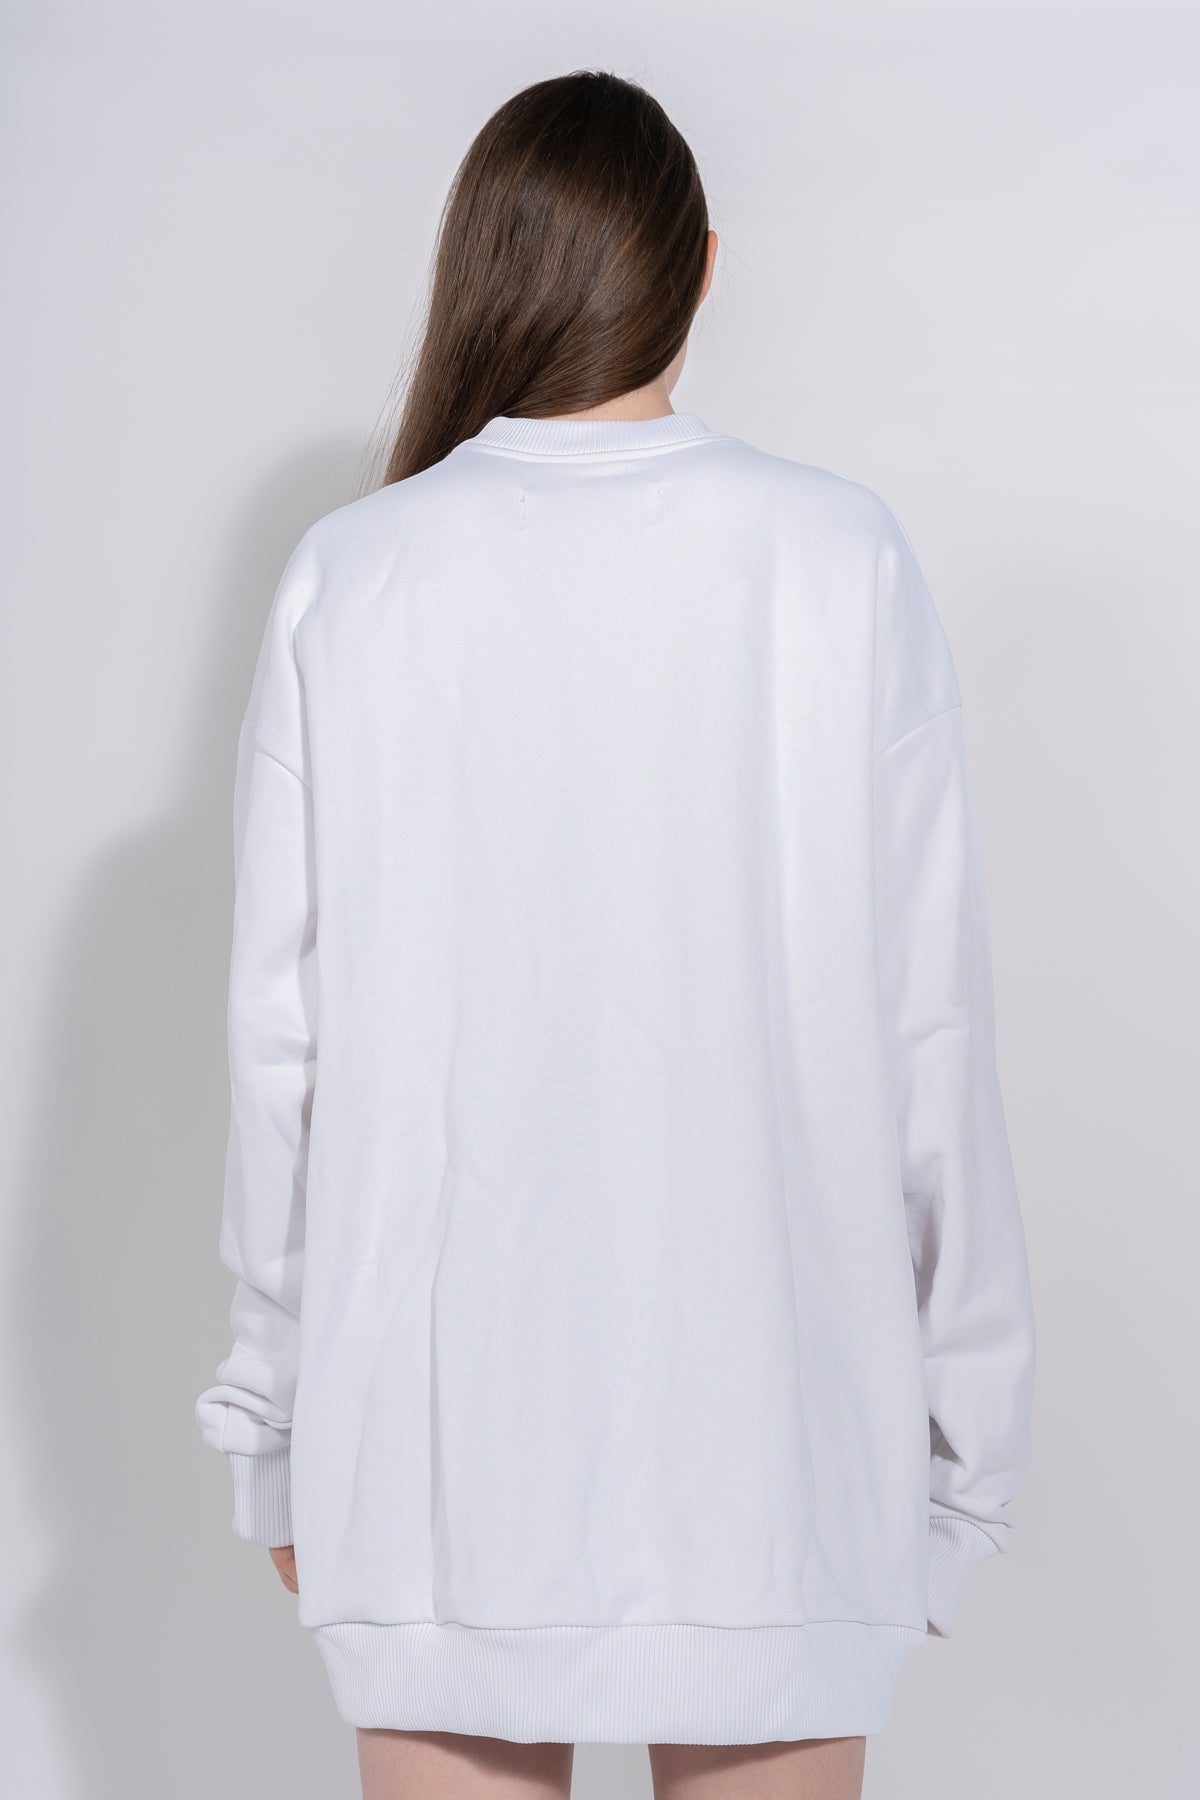 M'A EMBROIDERED JUMPER IN WHITE marques almeida